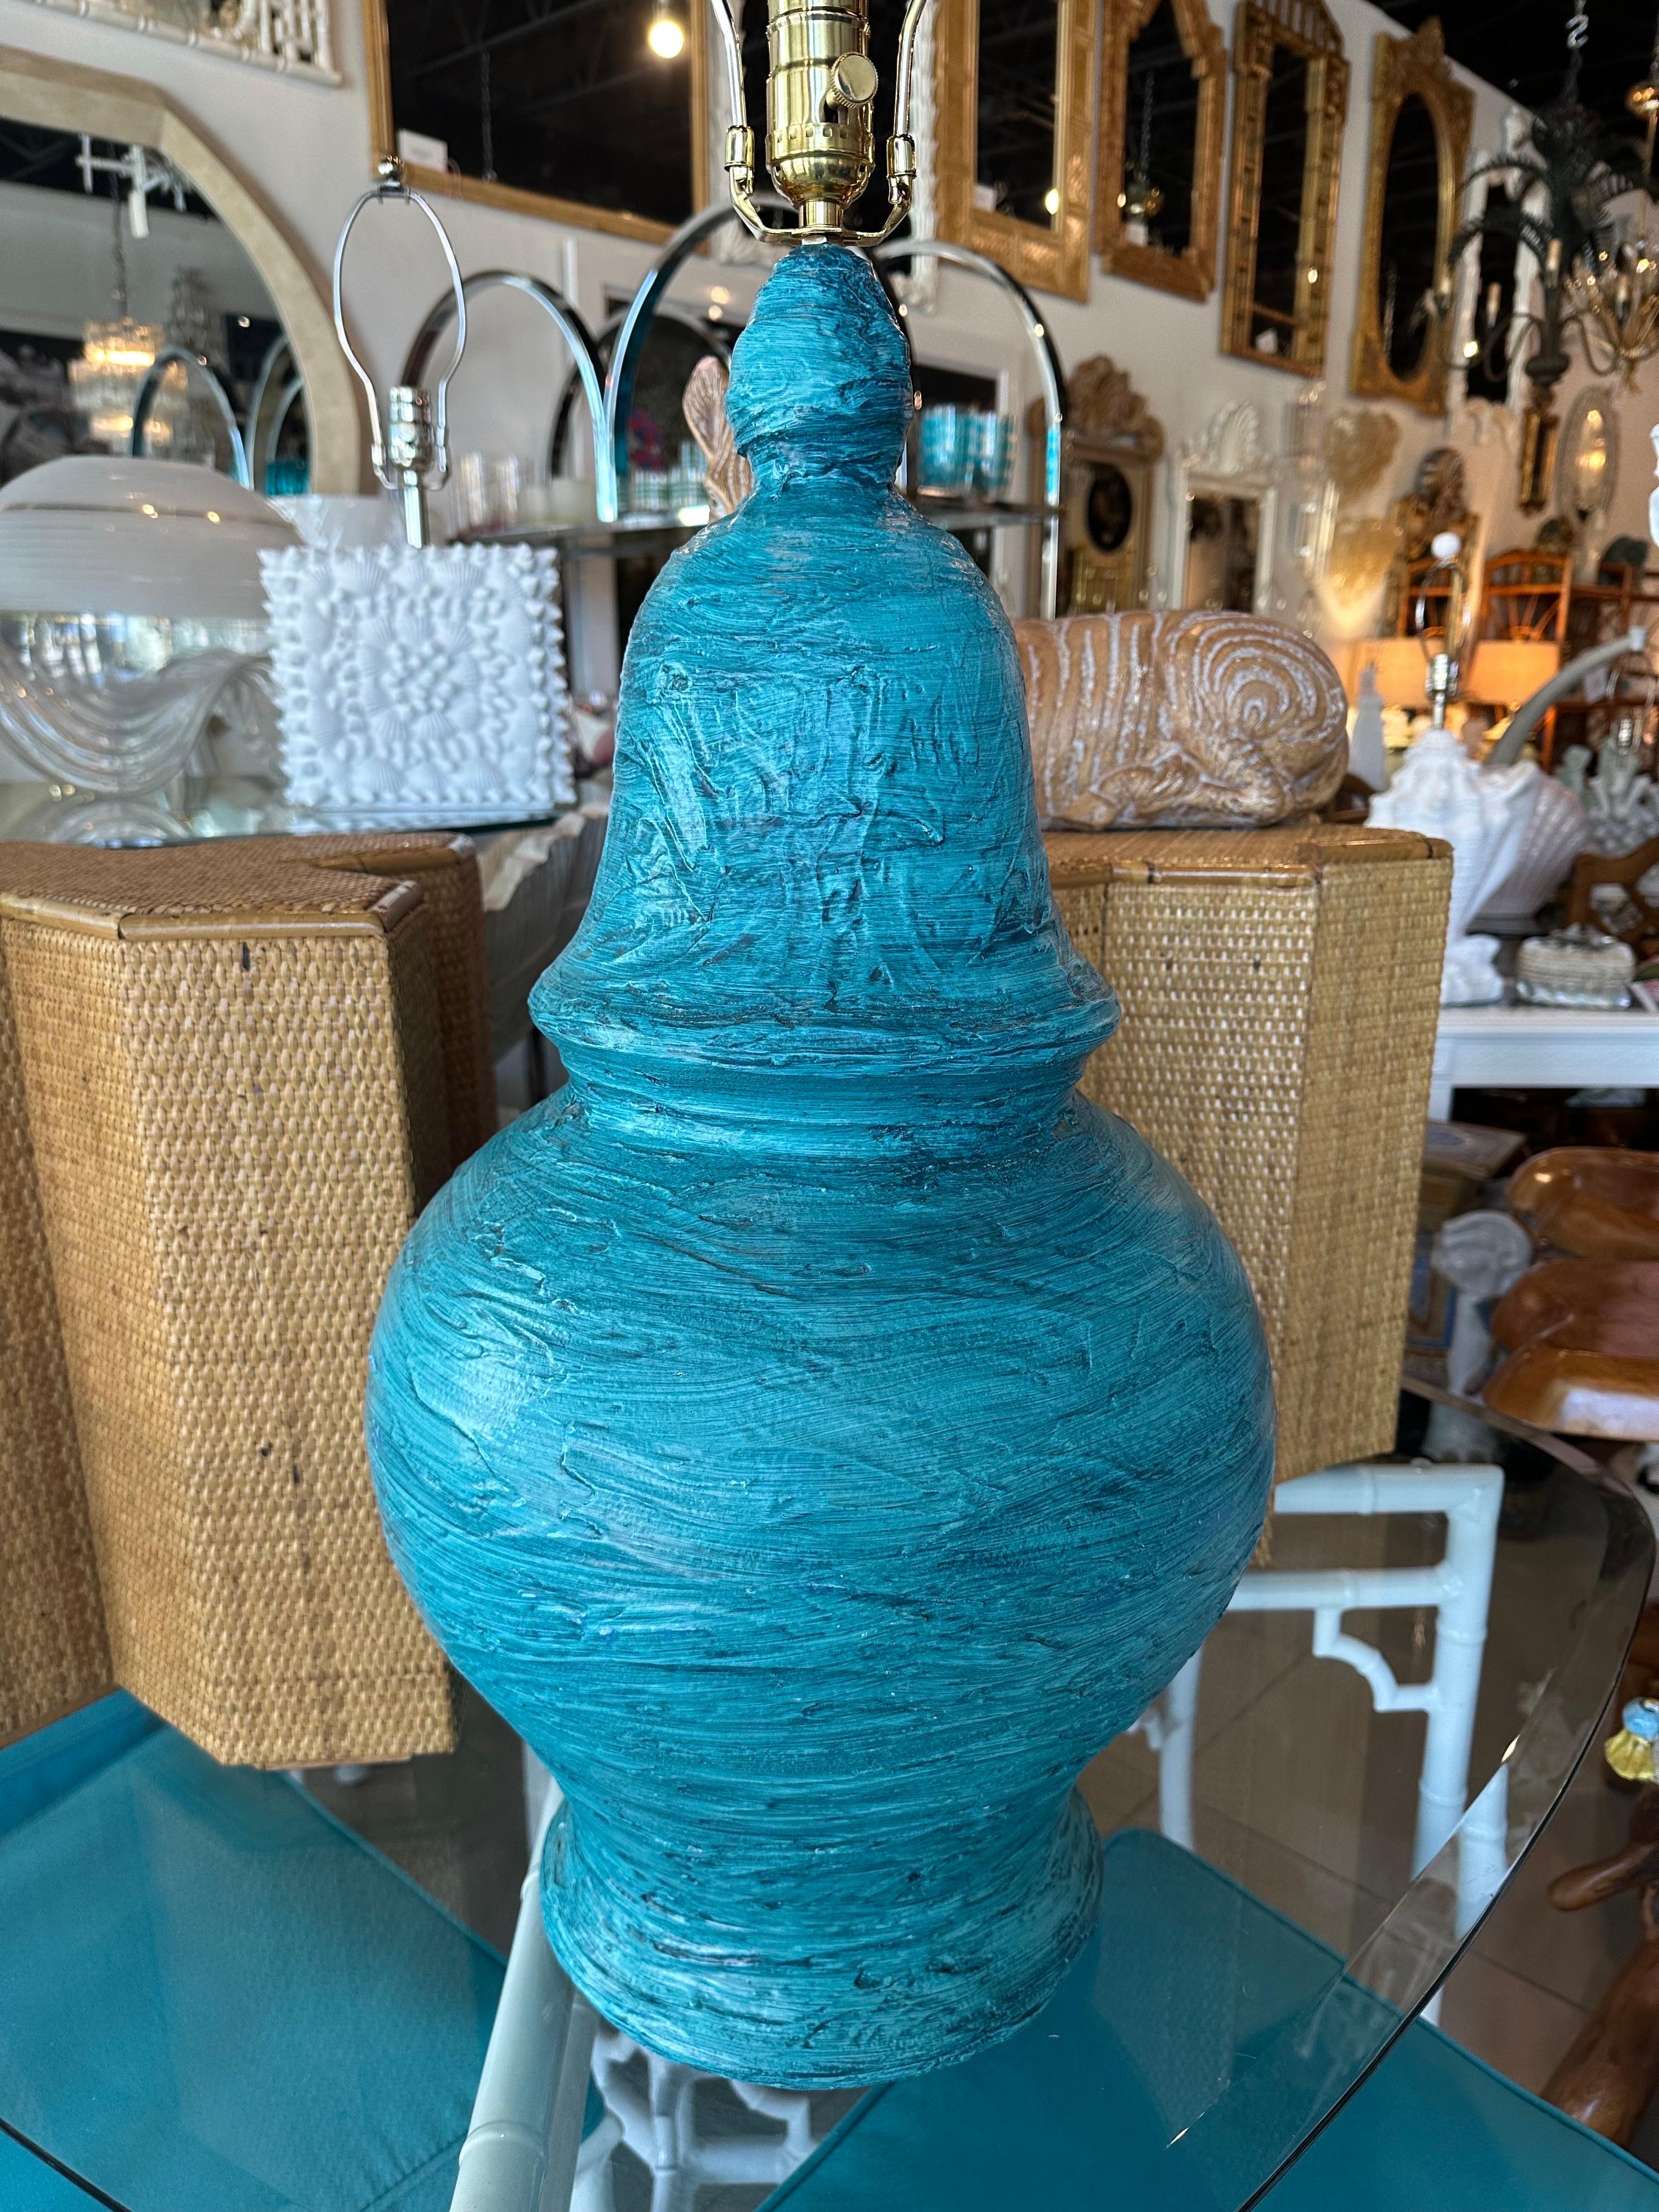 Large Mid-Century Modern Blue Terracotta Pottery Table Lamp Bitossi Style For Sale 2